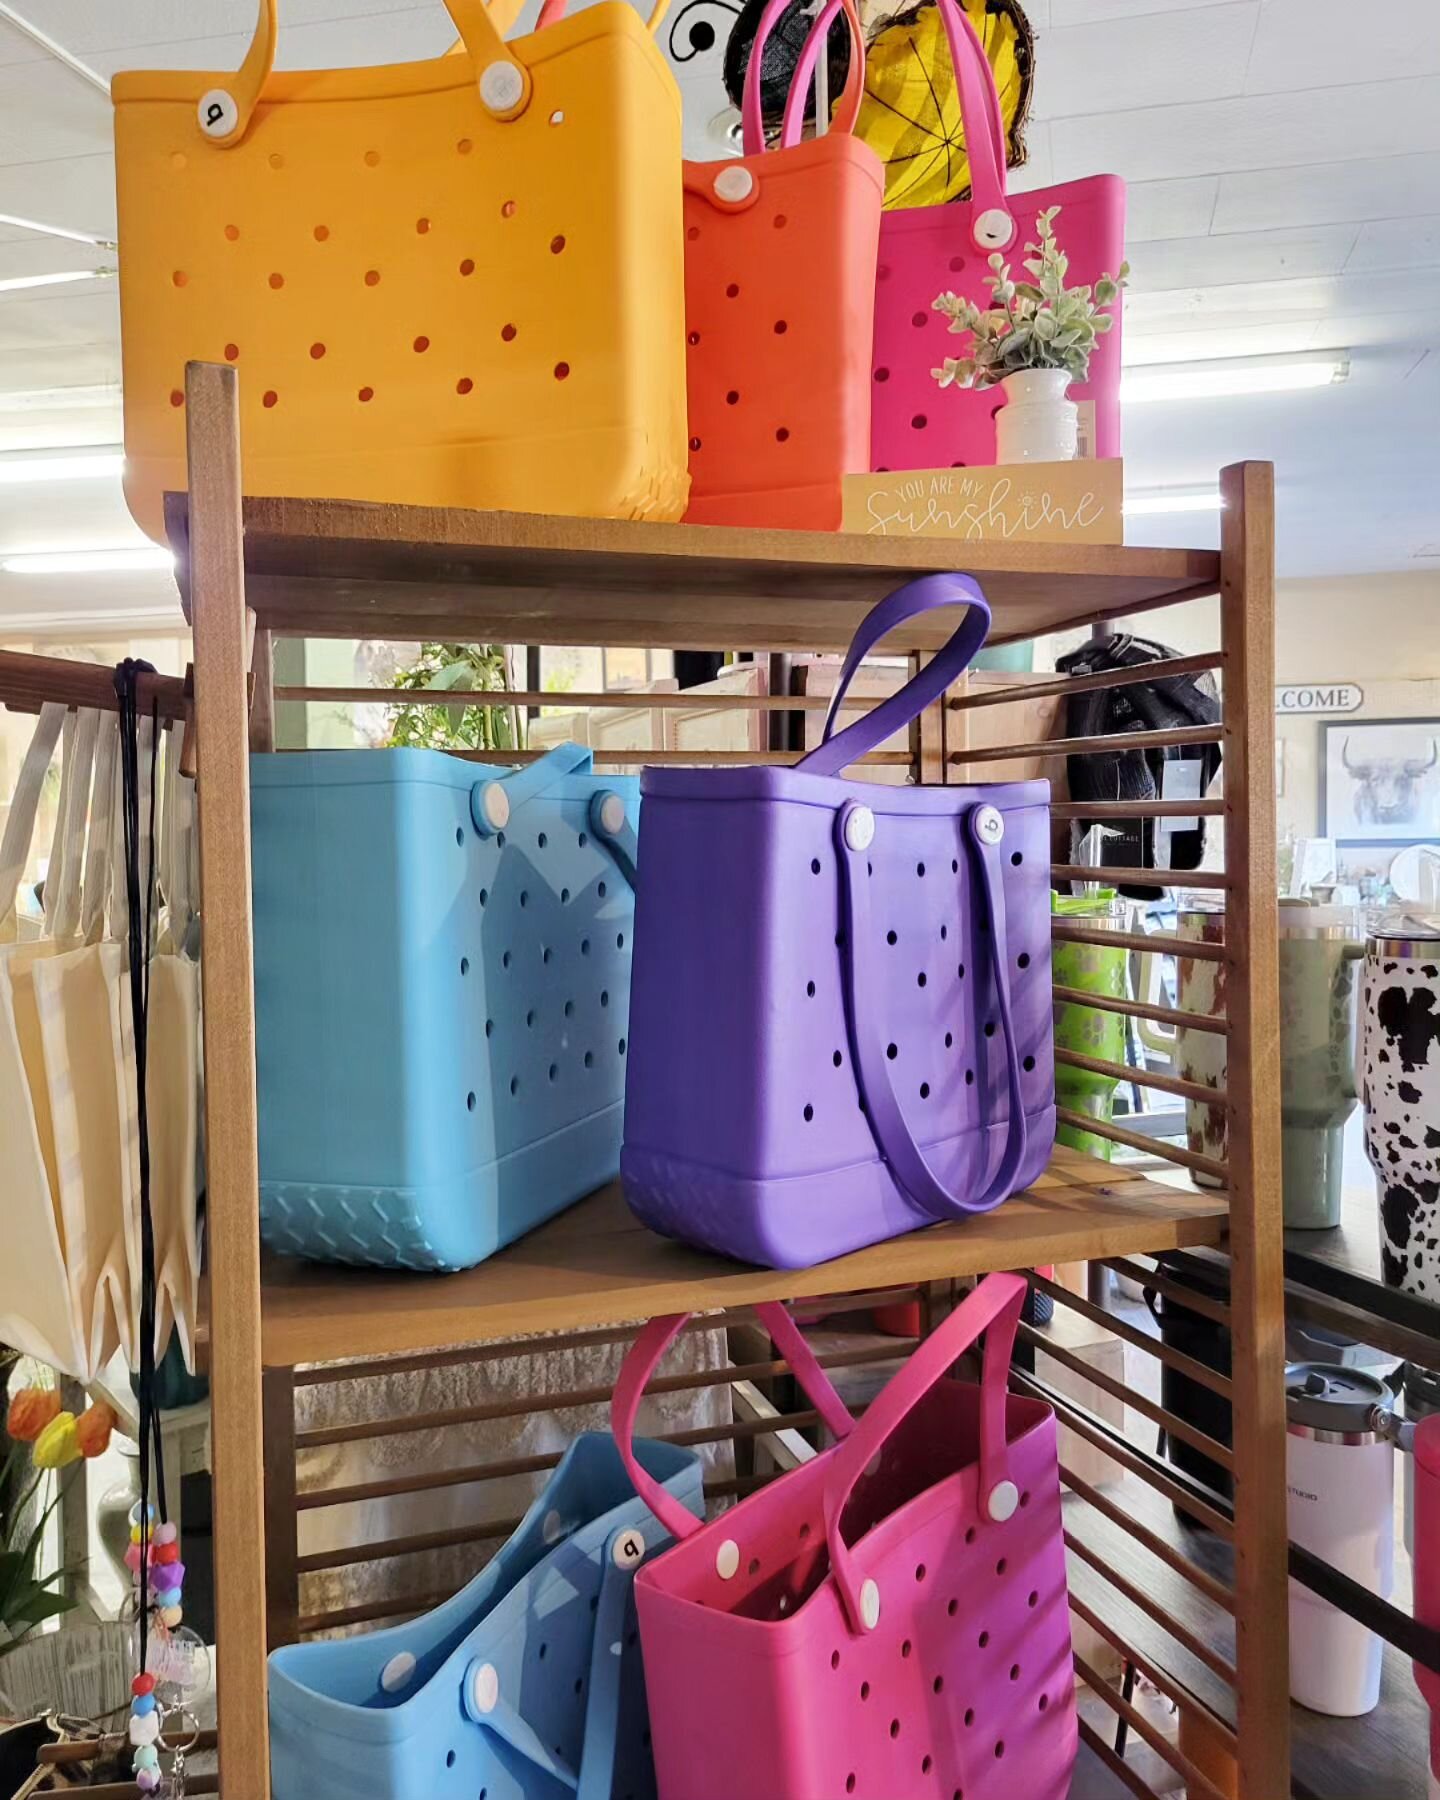 Our Bonnie bags are selling like hot cakes! 

We're on our second shipment! 

Firm beliver that every TEACHER and MOM needs one of these in their lives.